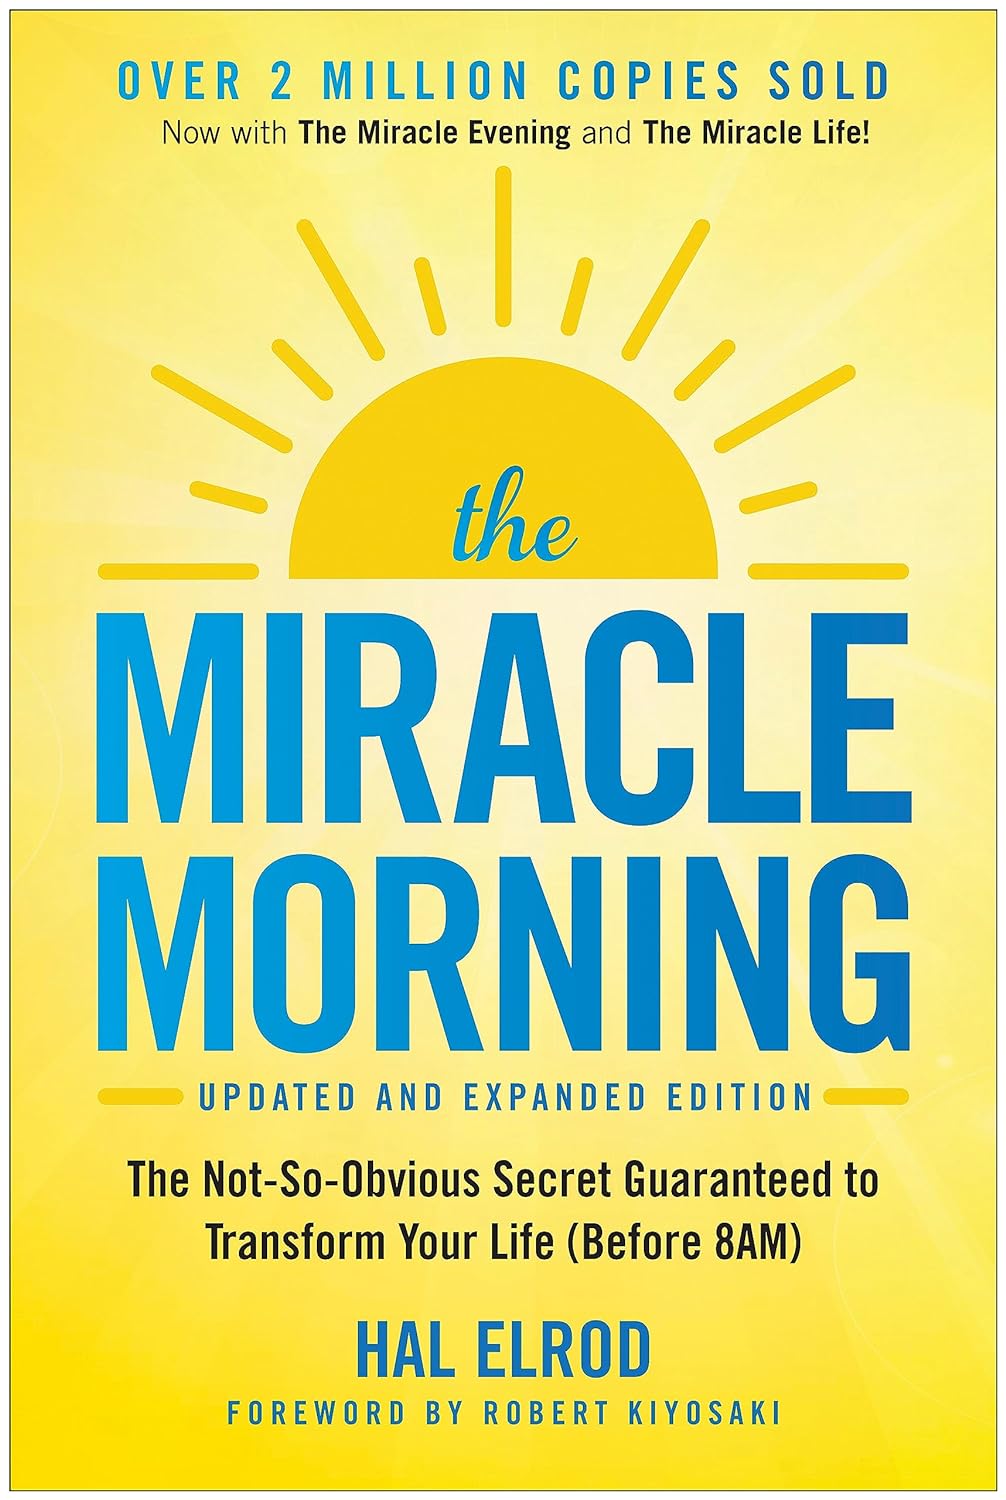 The Miracle Morning (Updated and Expanded Edition) The Not-So-Obvious Secret Guaranteed to Transform Your Life (Before 8am) - SureShot Books Publishing LLC